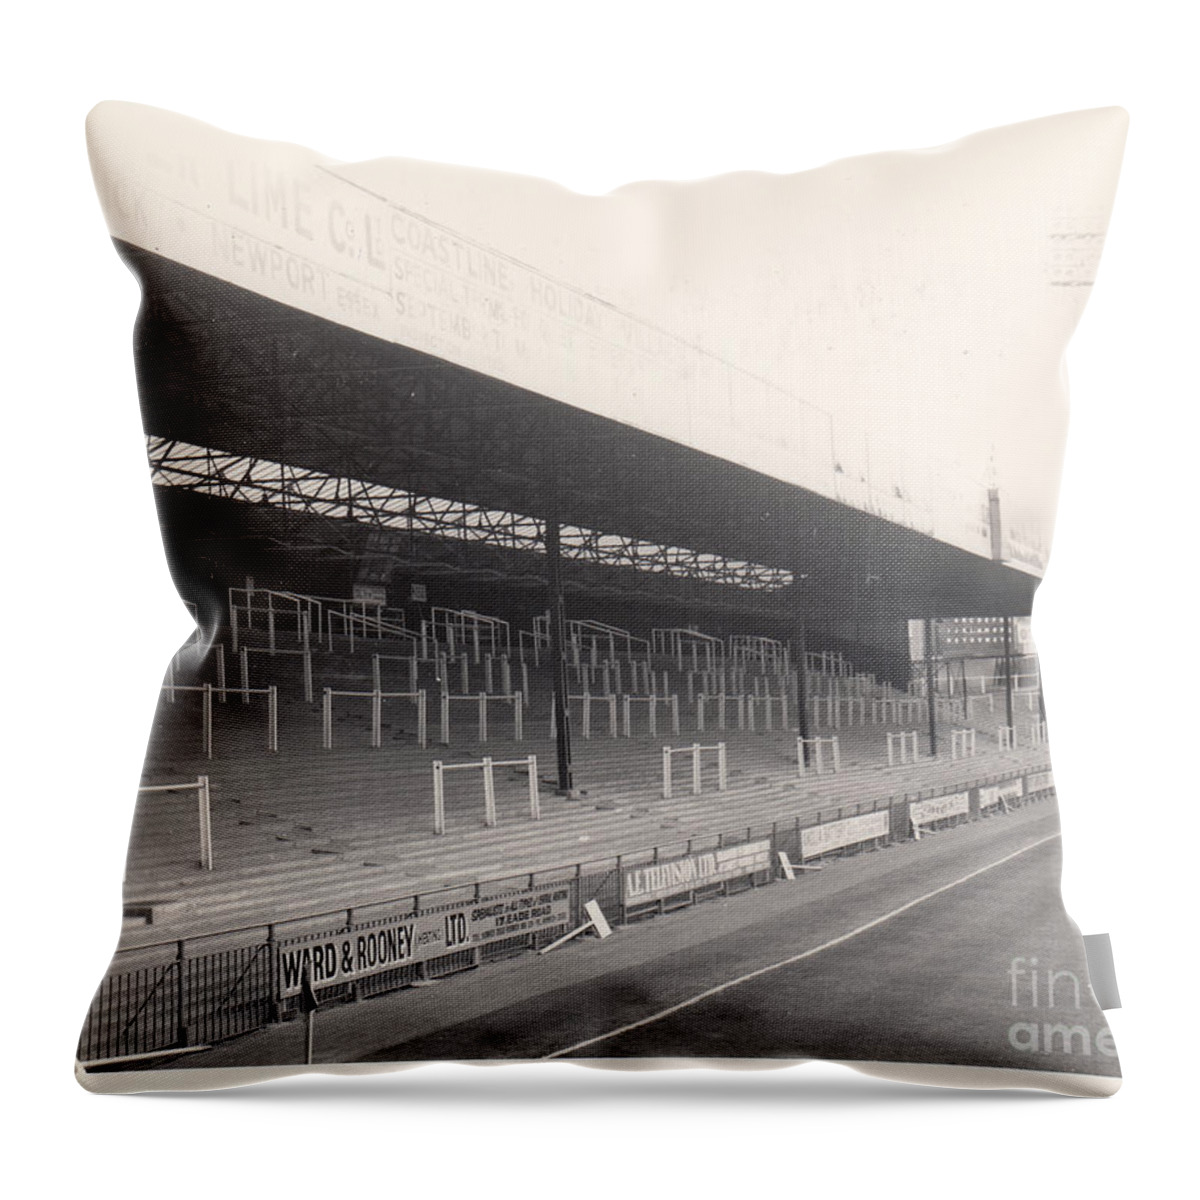  Throw Pillow featuring the photograph Norwich City - Carrow Road - South Stand 1 - BW - 1960s by Legendary Football Grounds